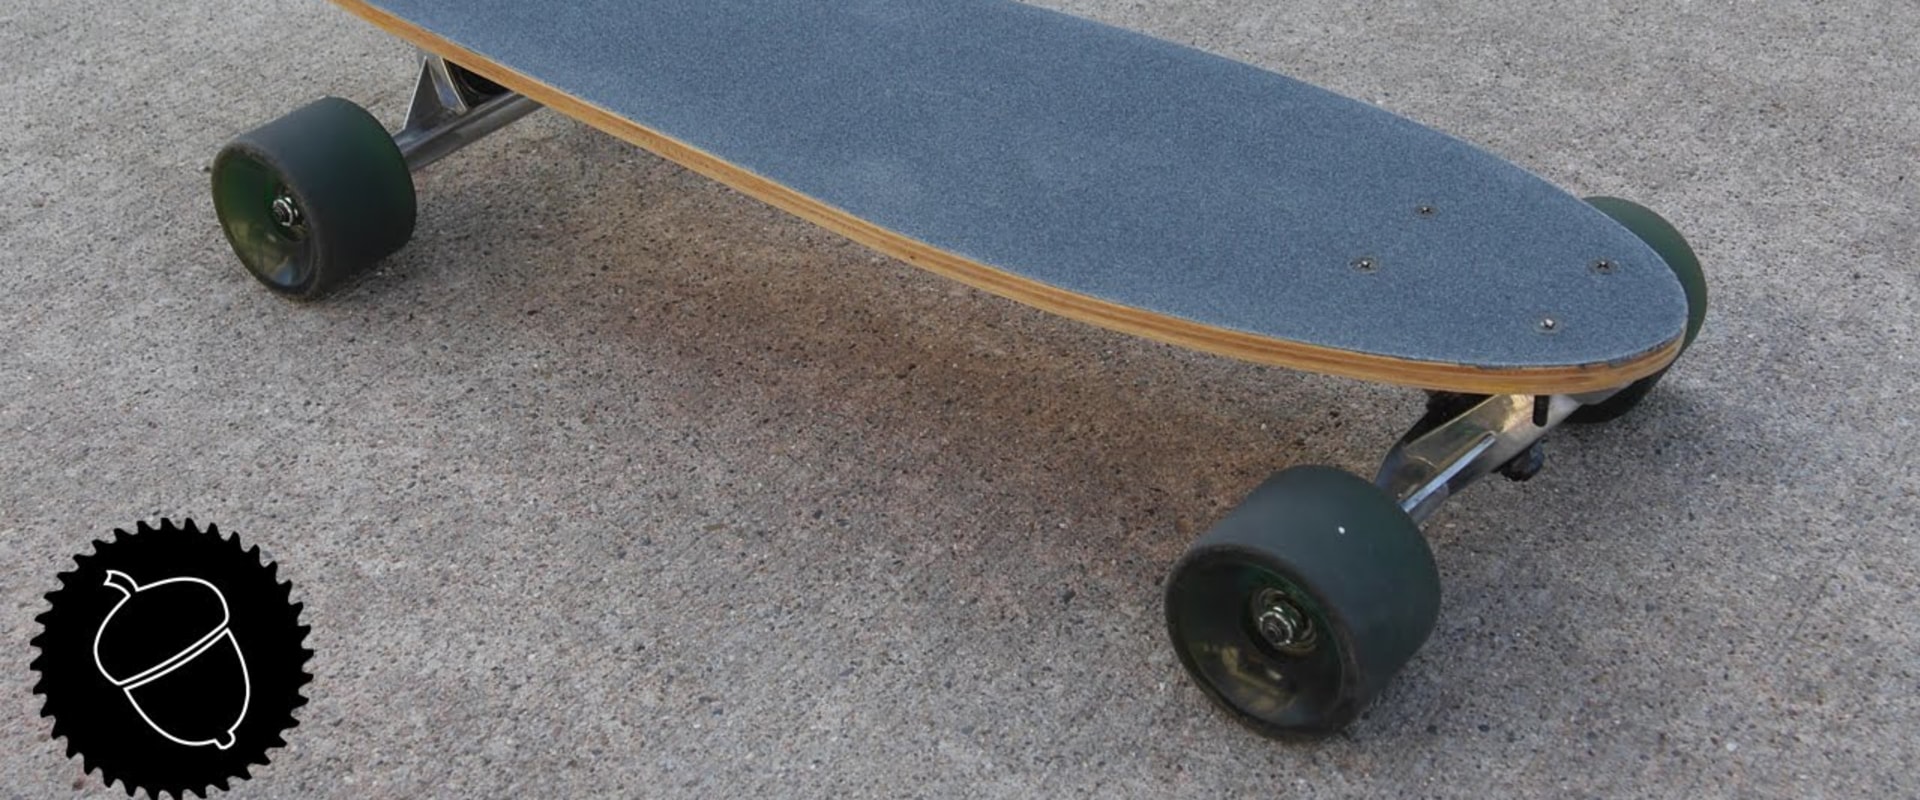 Materials Used in Penny Board Construction